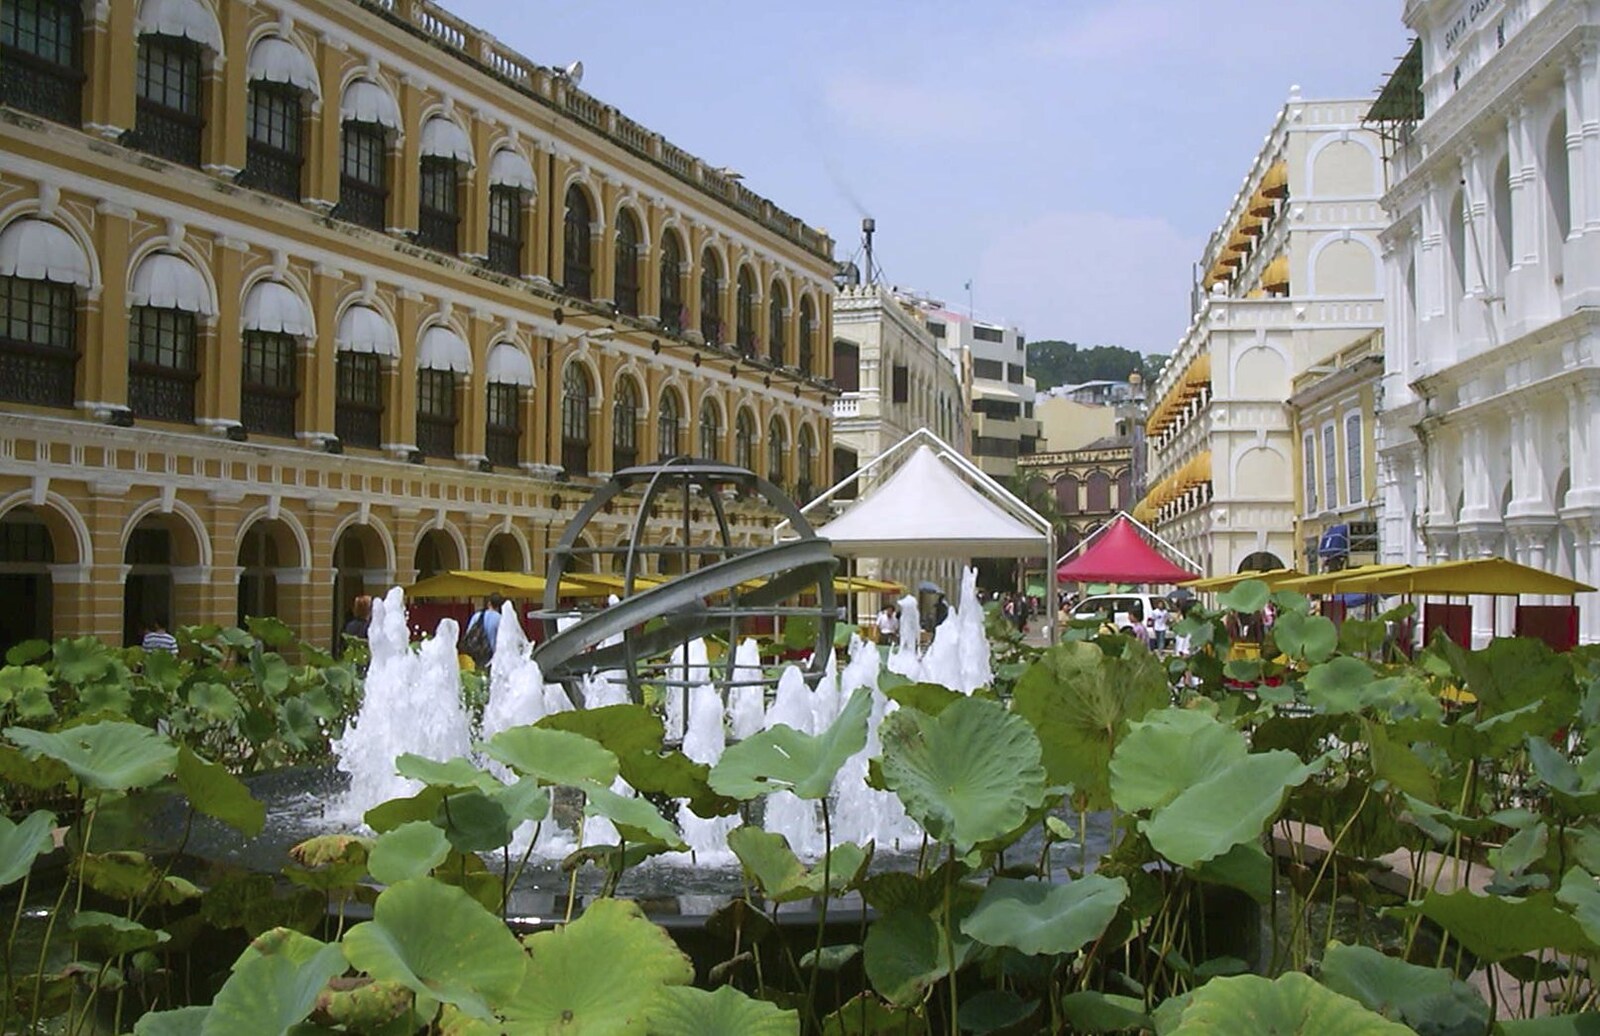 A Day Trip to Macau, China - 16th August 2001: Foliage and fountains